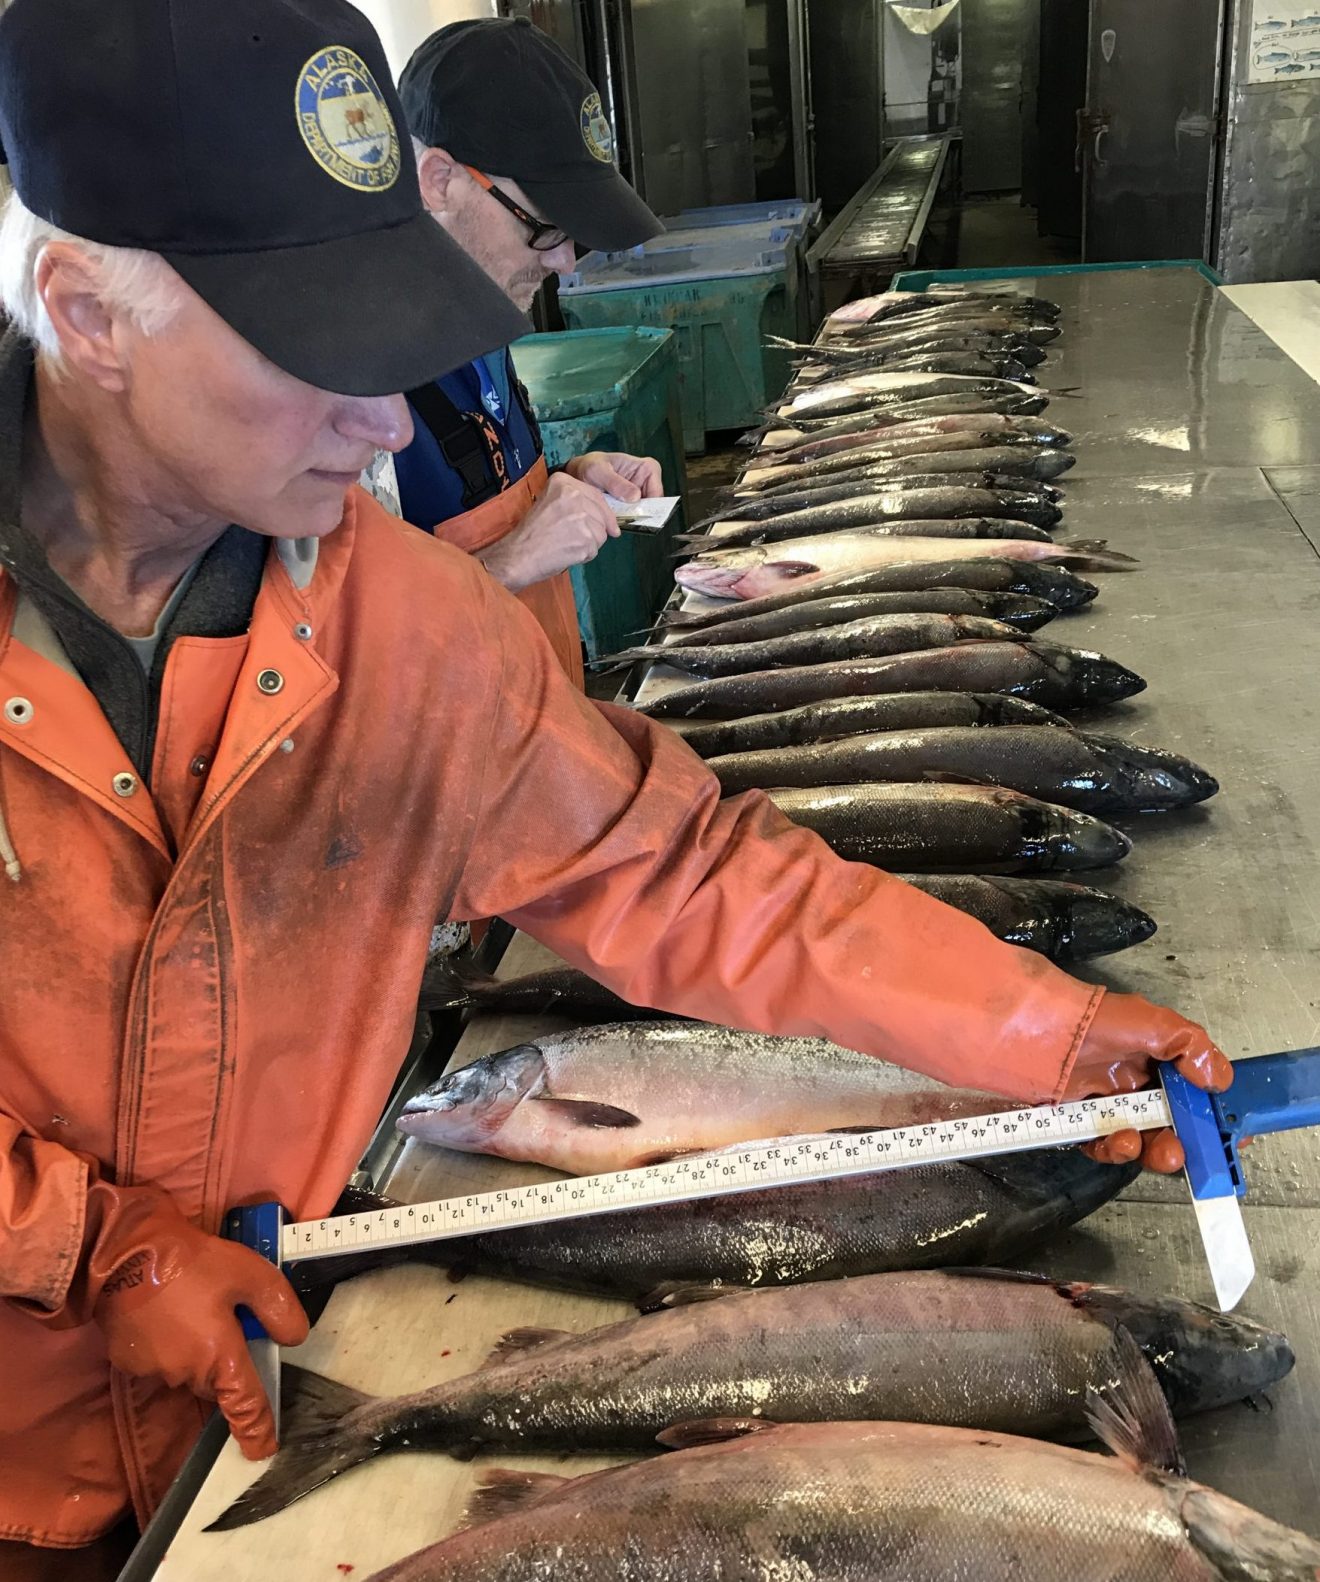 Salmon across Alaska getting smaller, impacting people and ecosystems